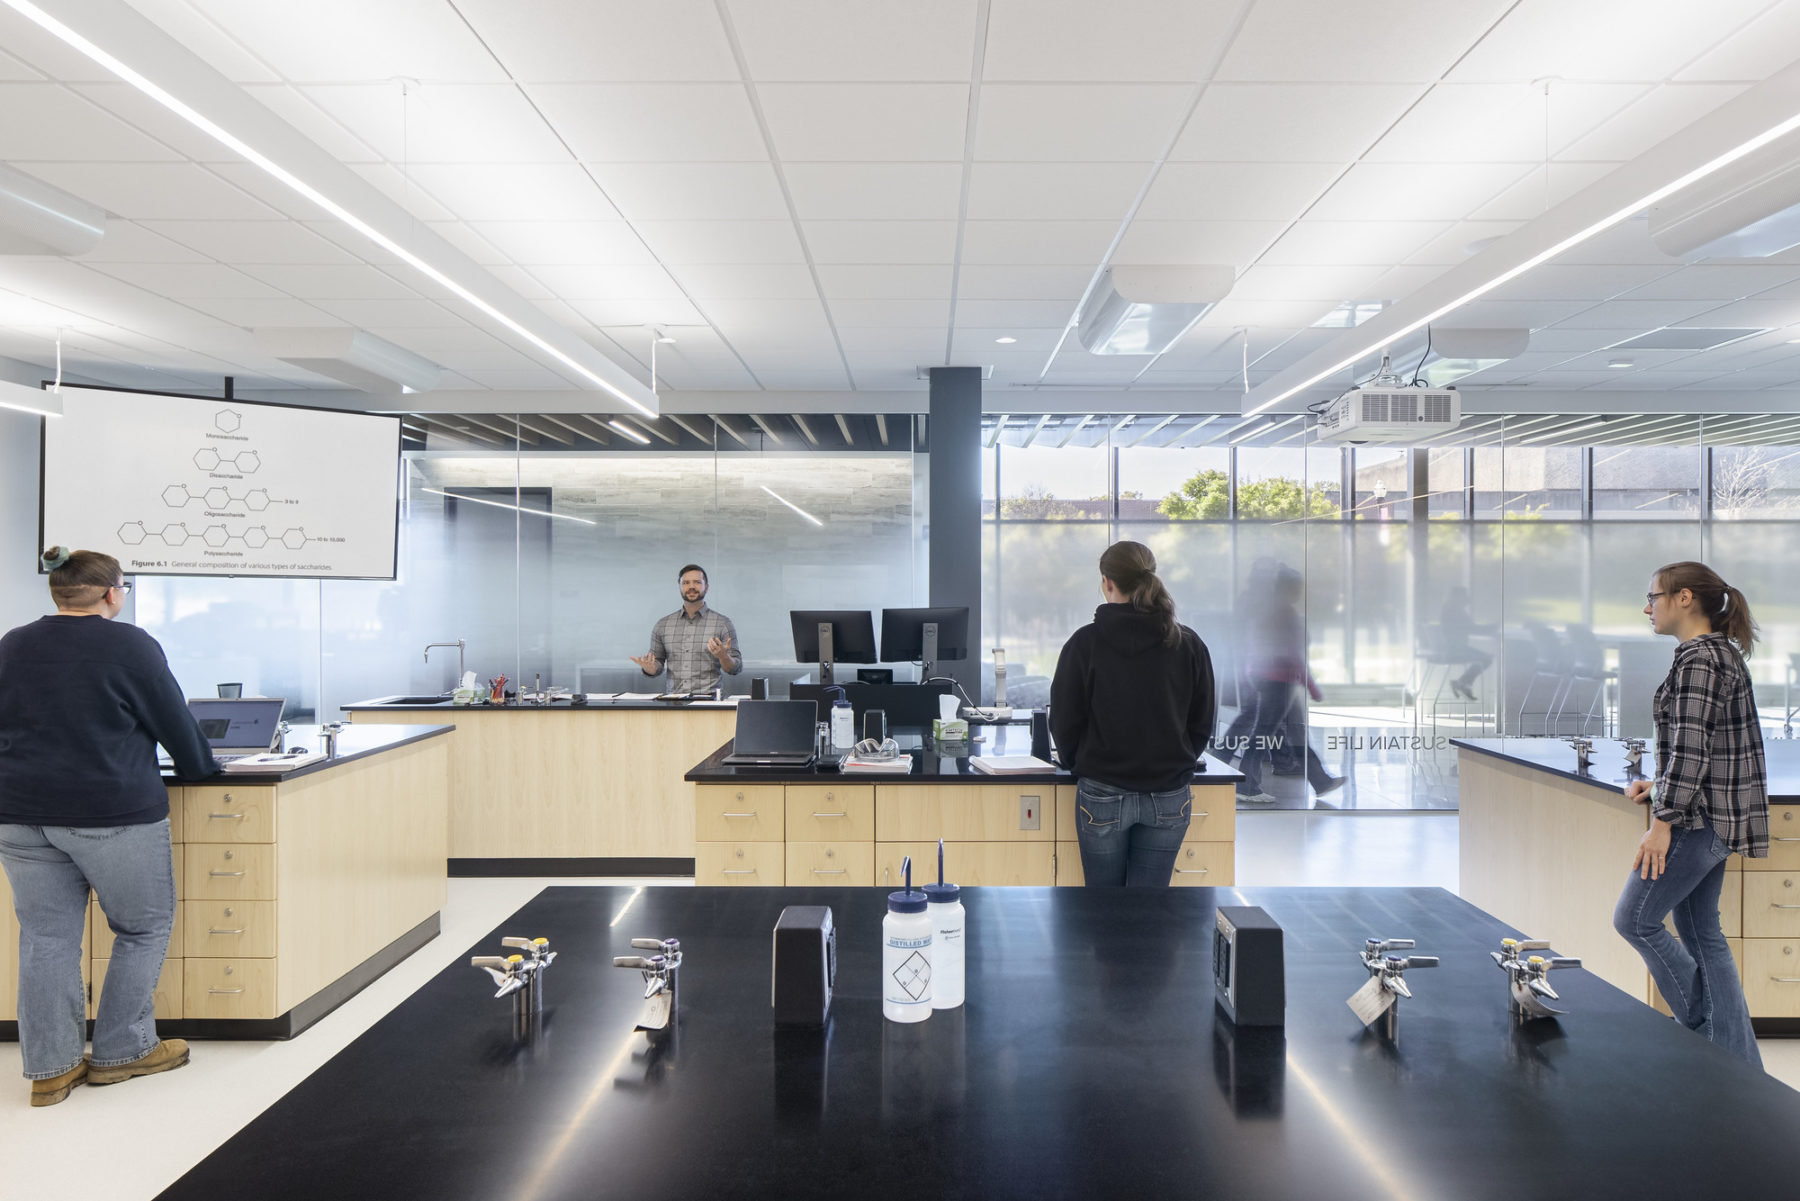 interior photo of lab space, an instructor stands behind a lab bench speaking to students